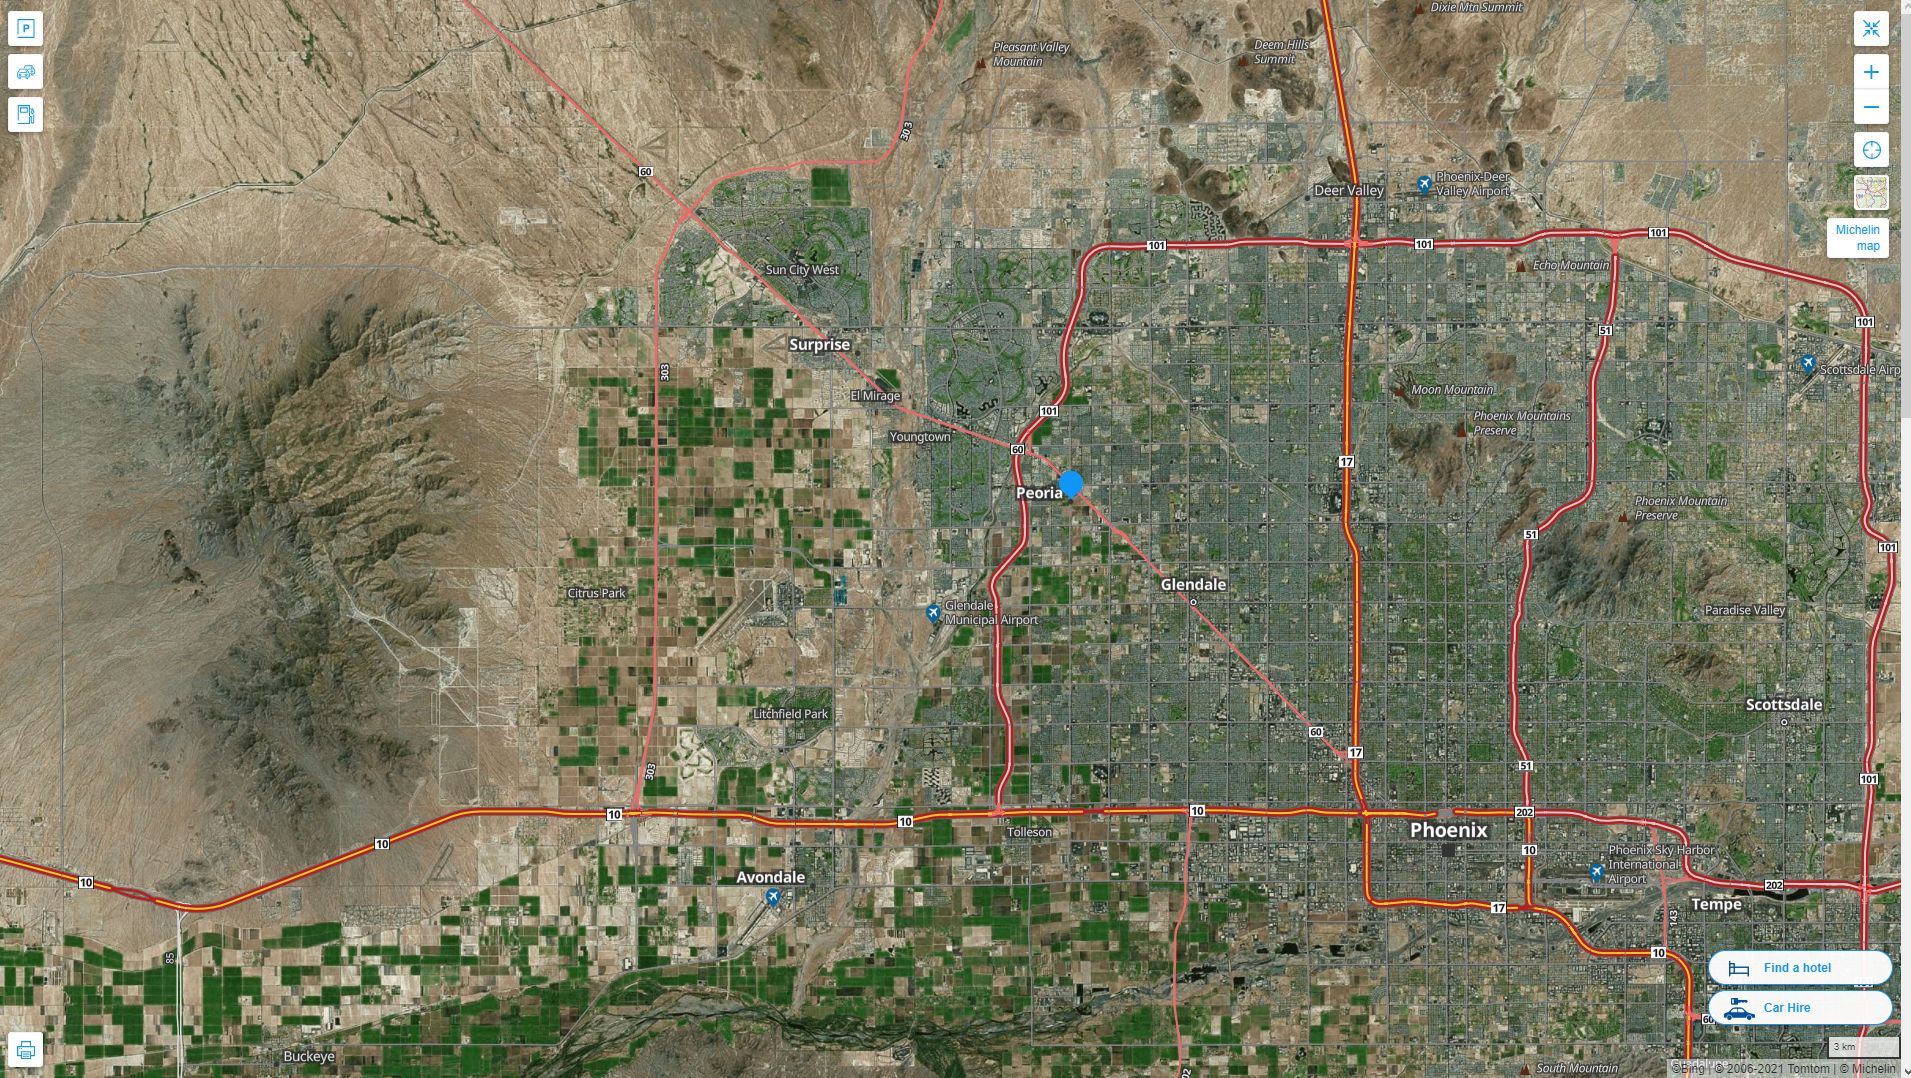 Peoria Arizona Highway and Road Map with Satellite View